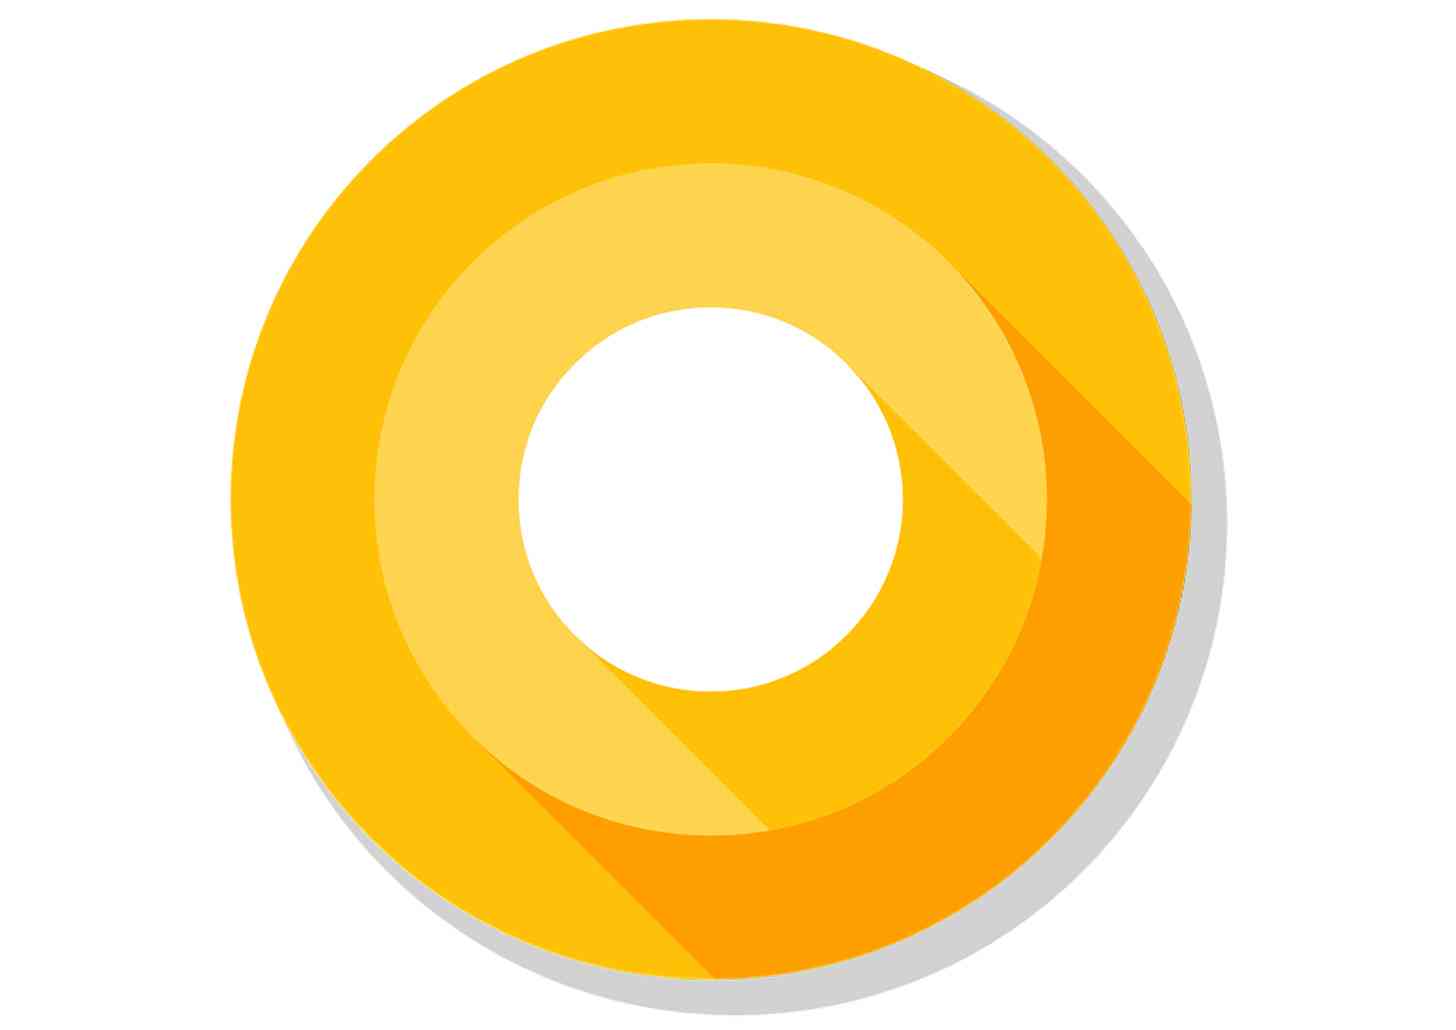 Android O logo official